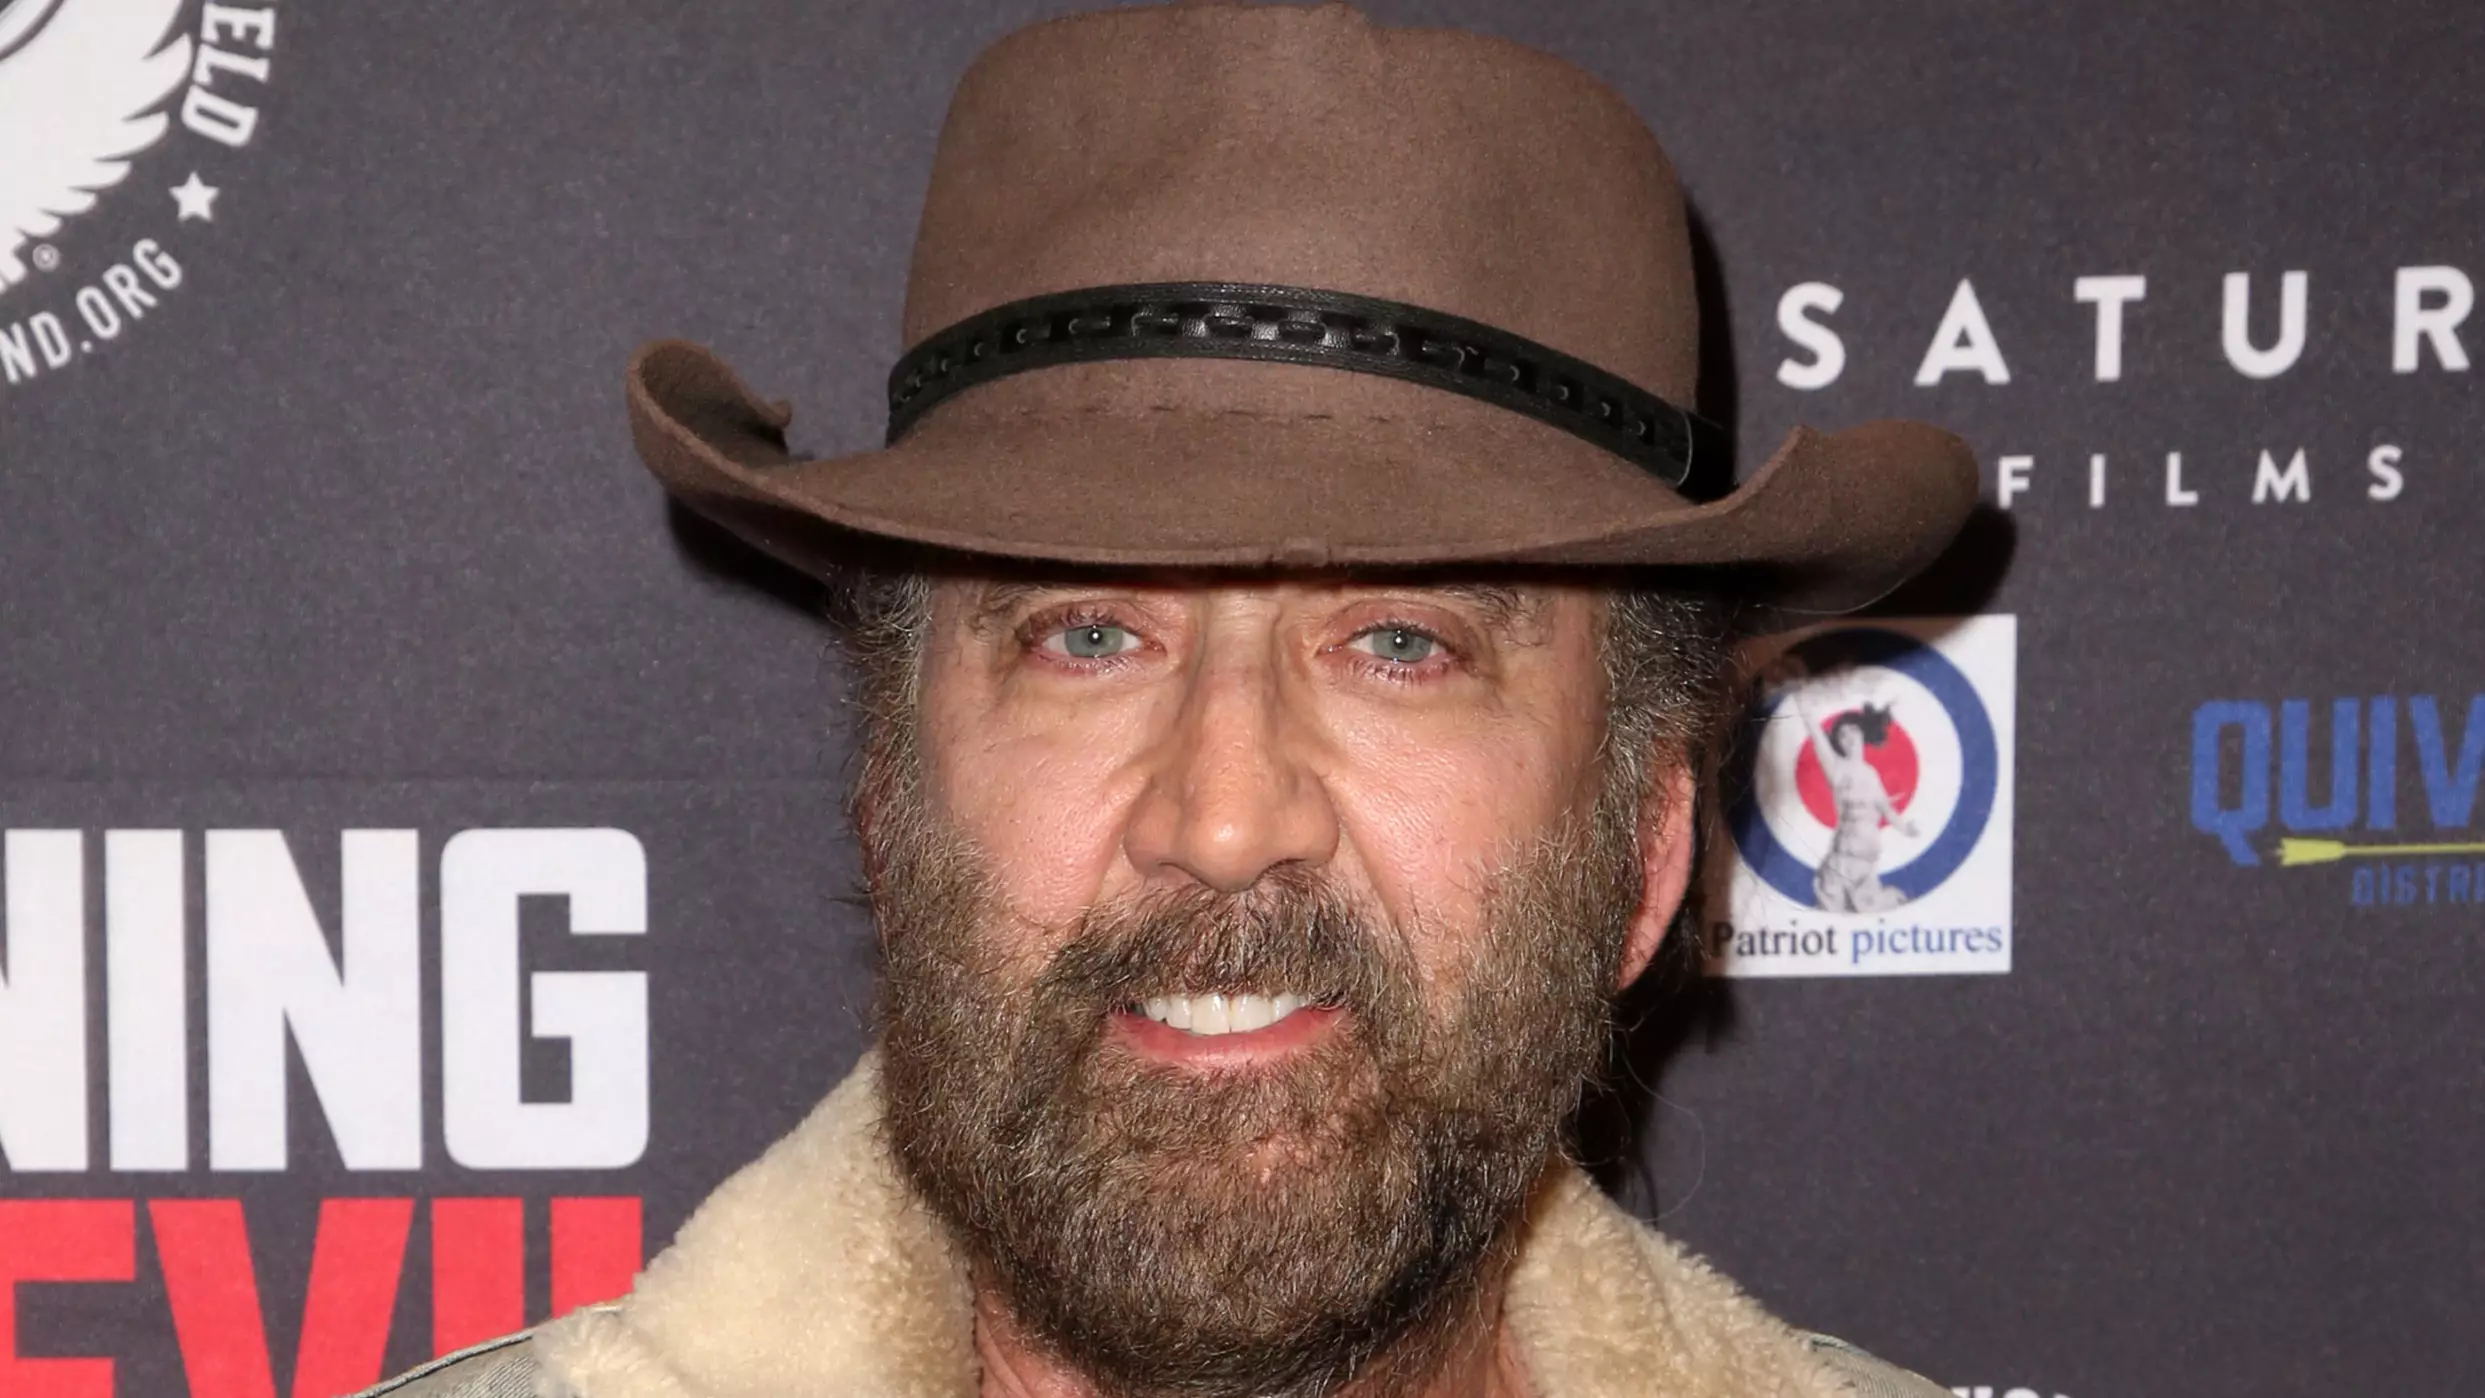 Nicolas Cage In Talks To Play Himself In The Unbearable Weight Of Massive Talent